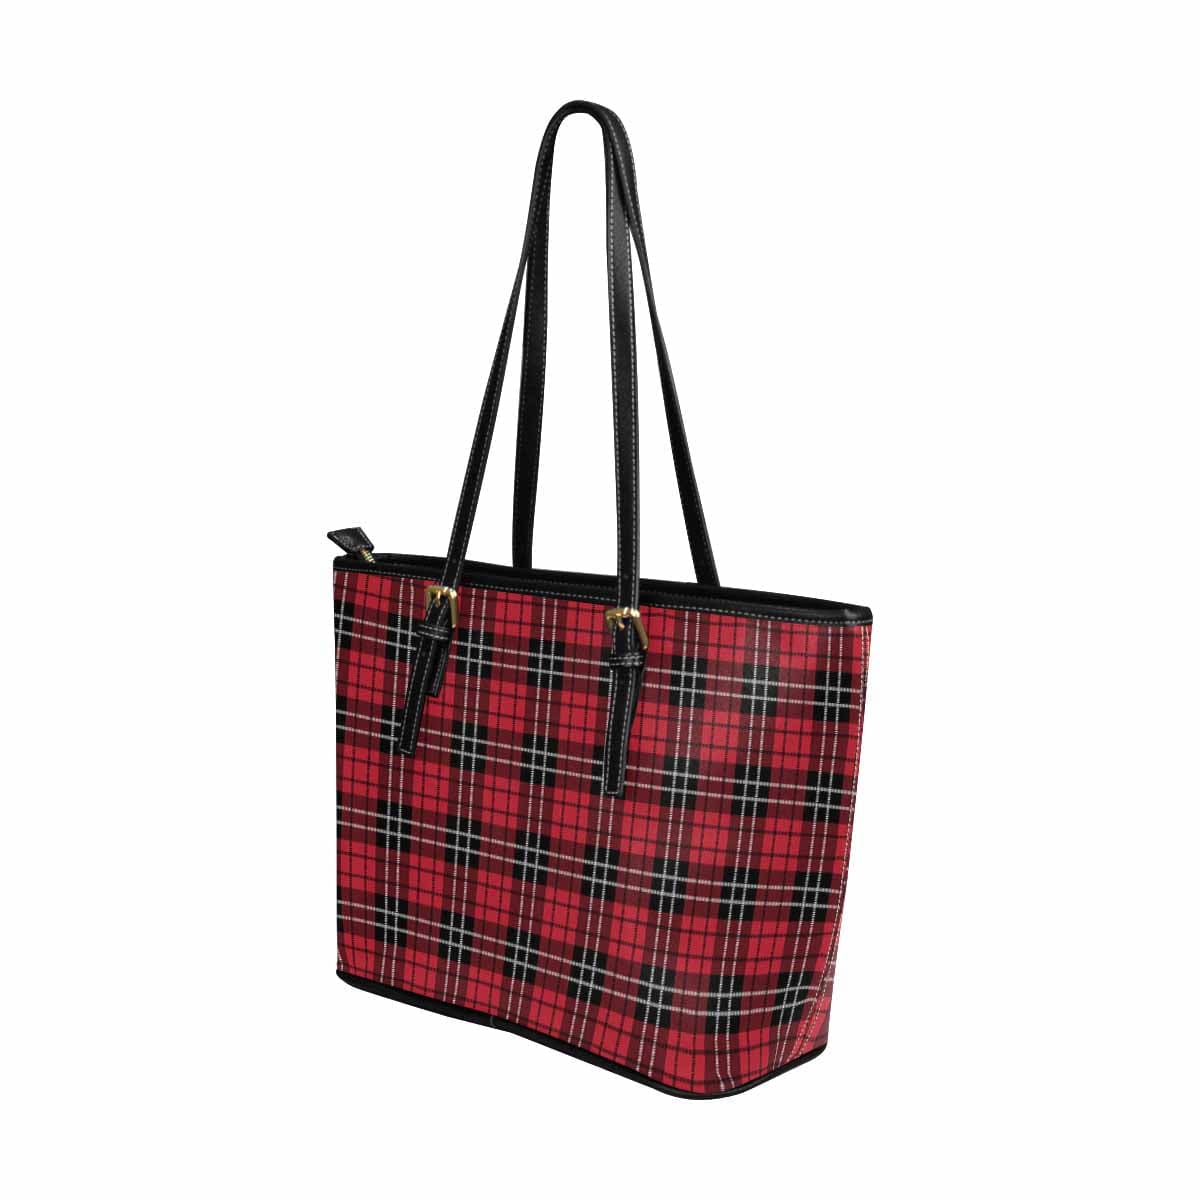 Large Leather Tote Shoulder Bag - Buffalo Plaid Red And Black S954658 - Bags